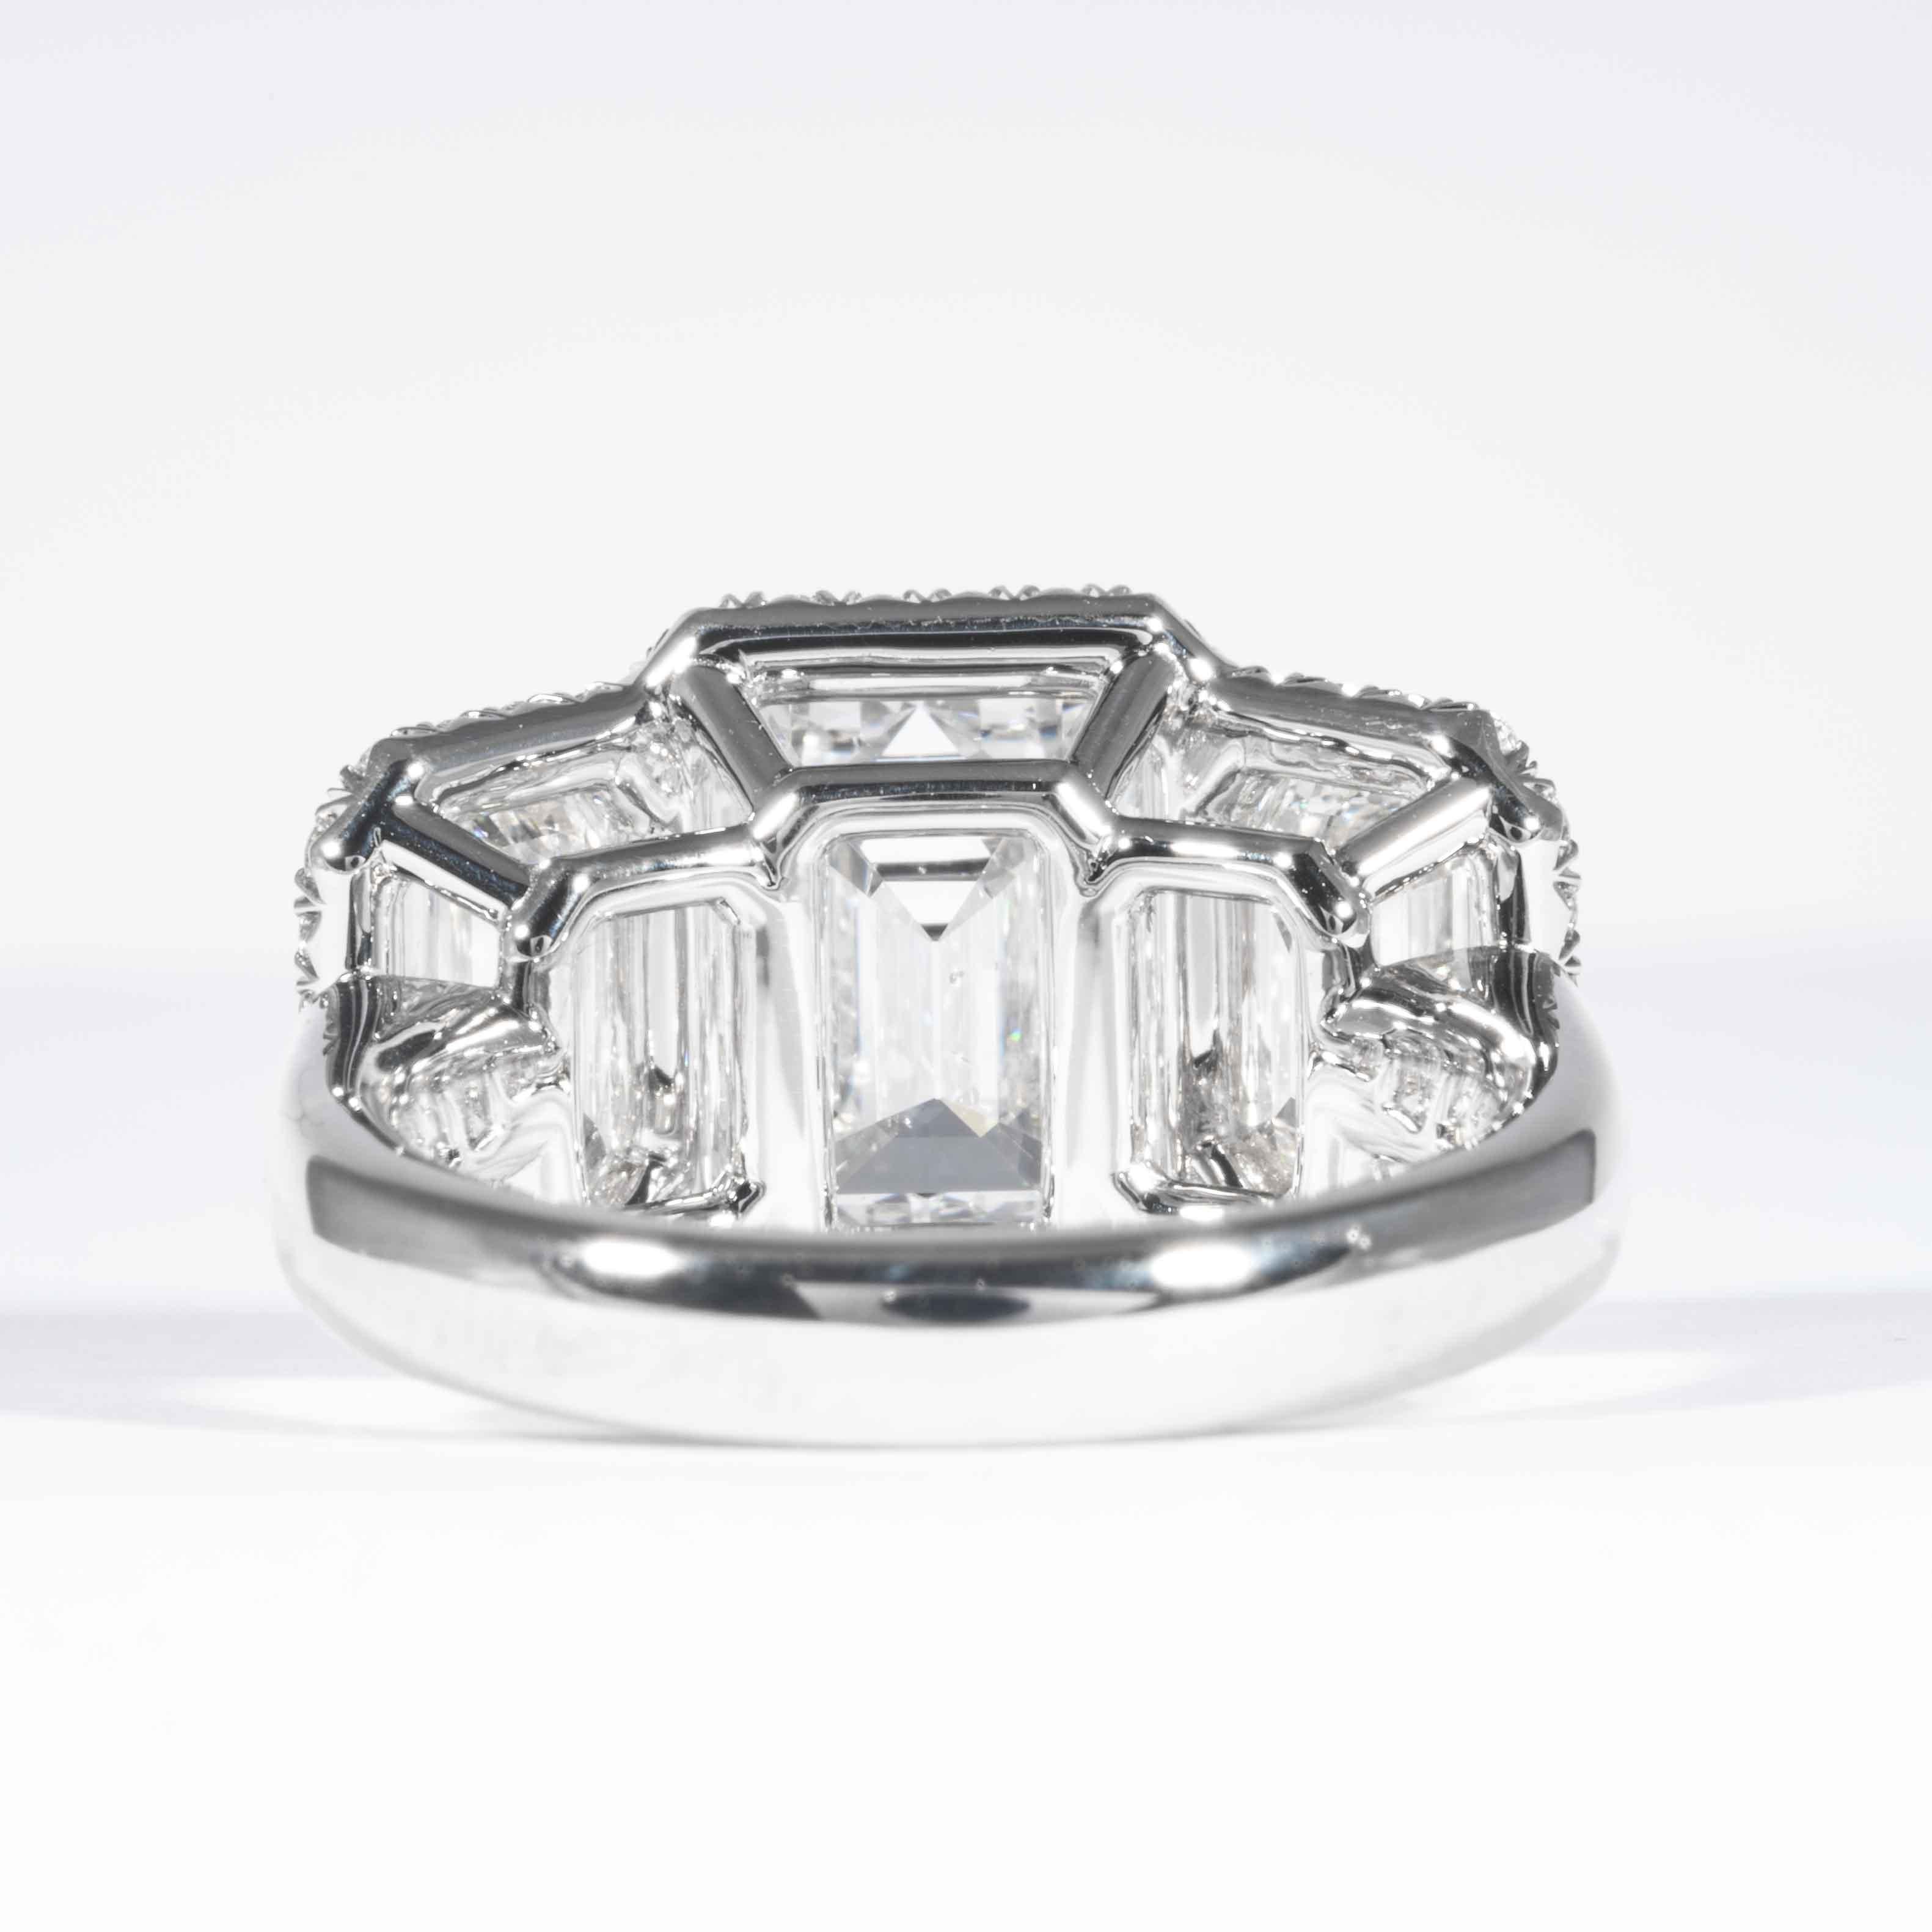 Shreve, Crump & Low GIA Certified 3.23 Carat G SI1 Emerald Cut Diamond Ring For Sale 2